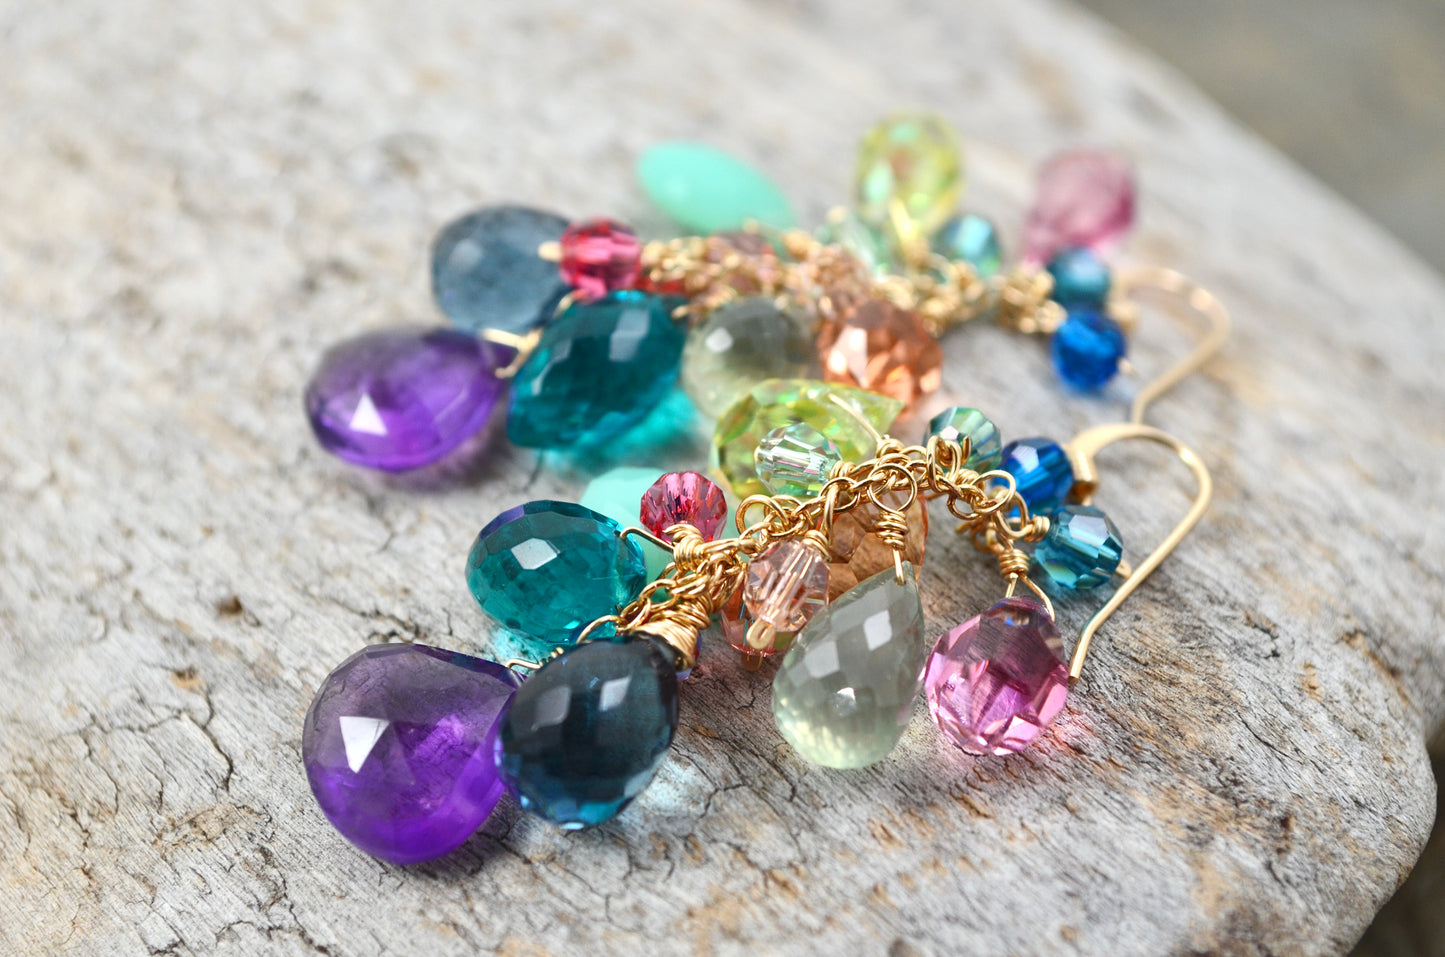 Rainbow gradient waterfall cluster earrings with gemstone and Crystal prisms